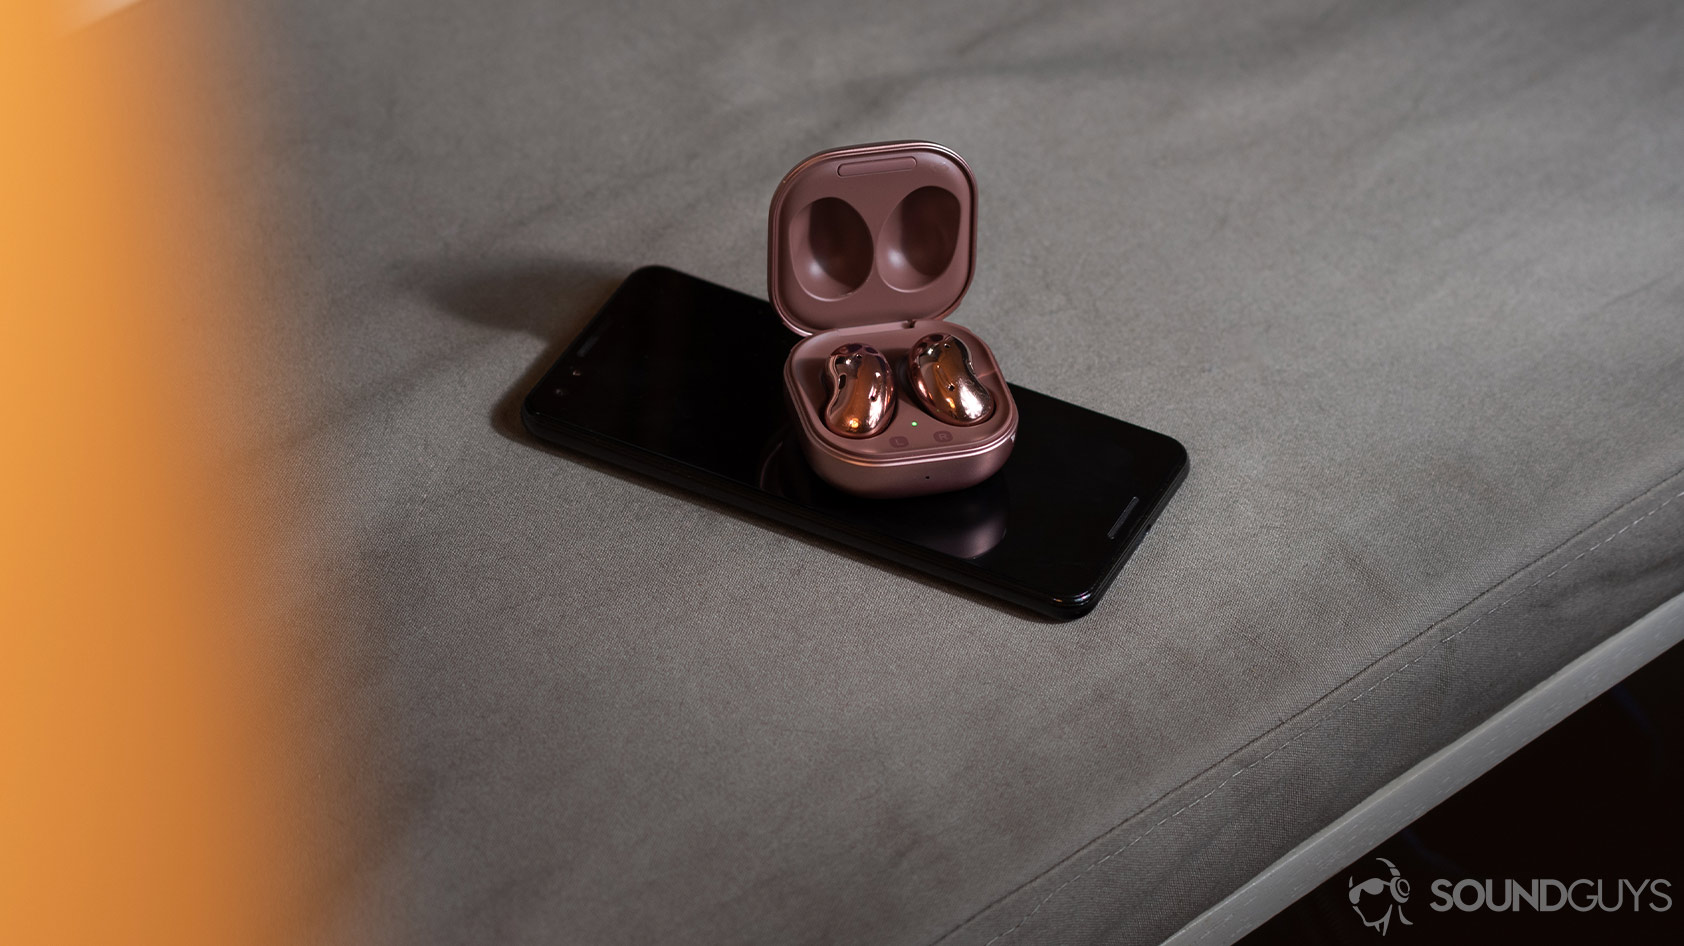 A picture of the Samsung Galaxy Buds Live on a Google Pixel 3 smartphone, both of which are on a gray surface.